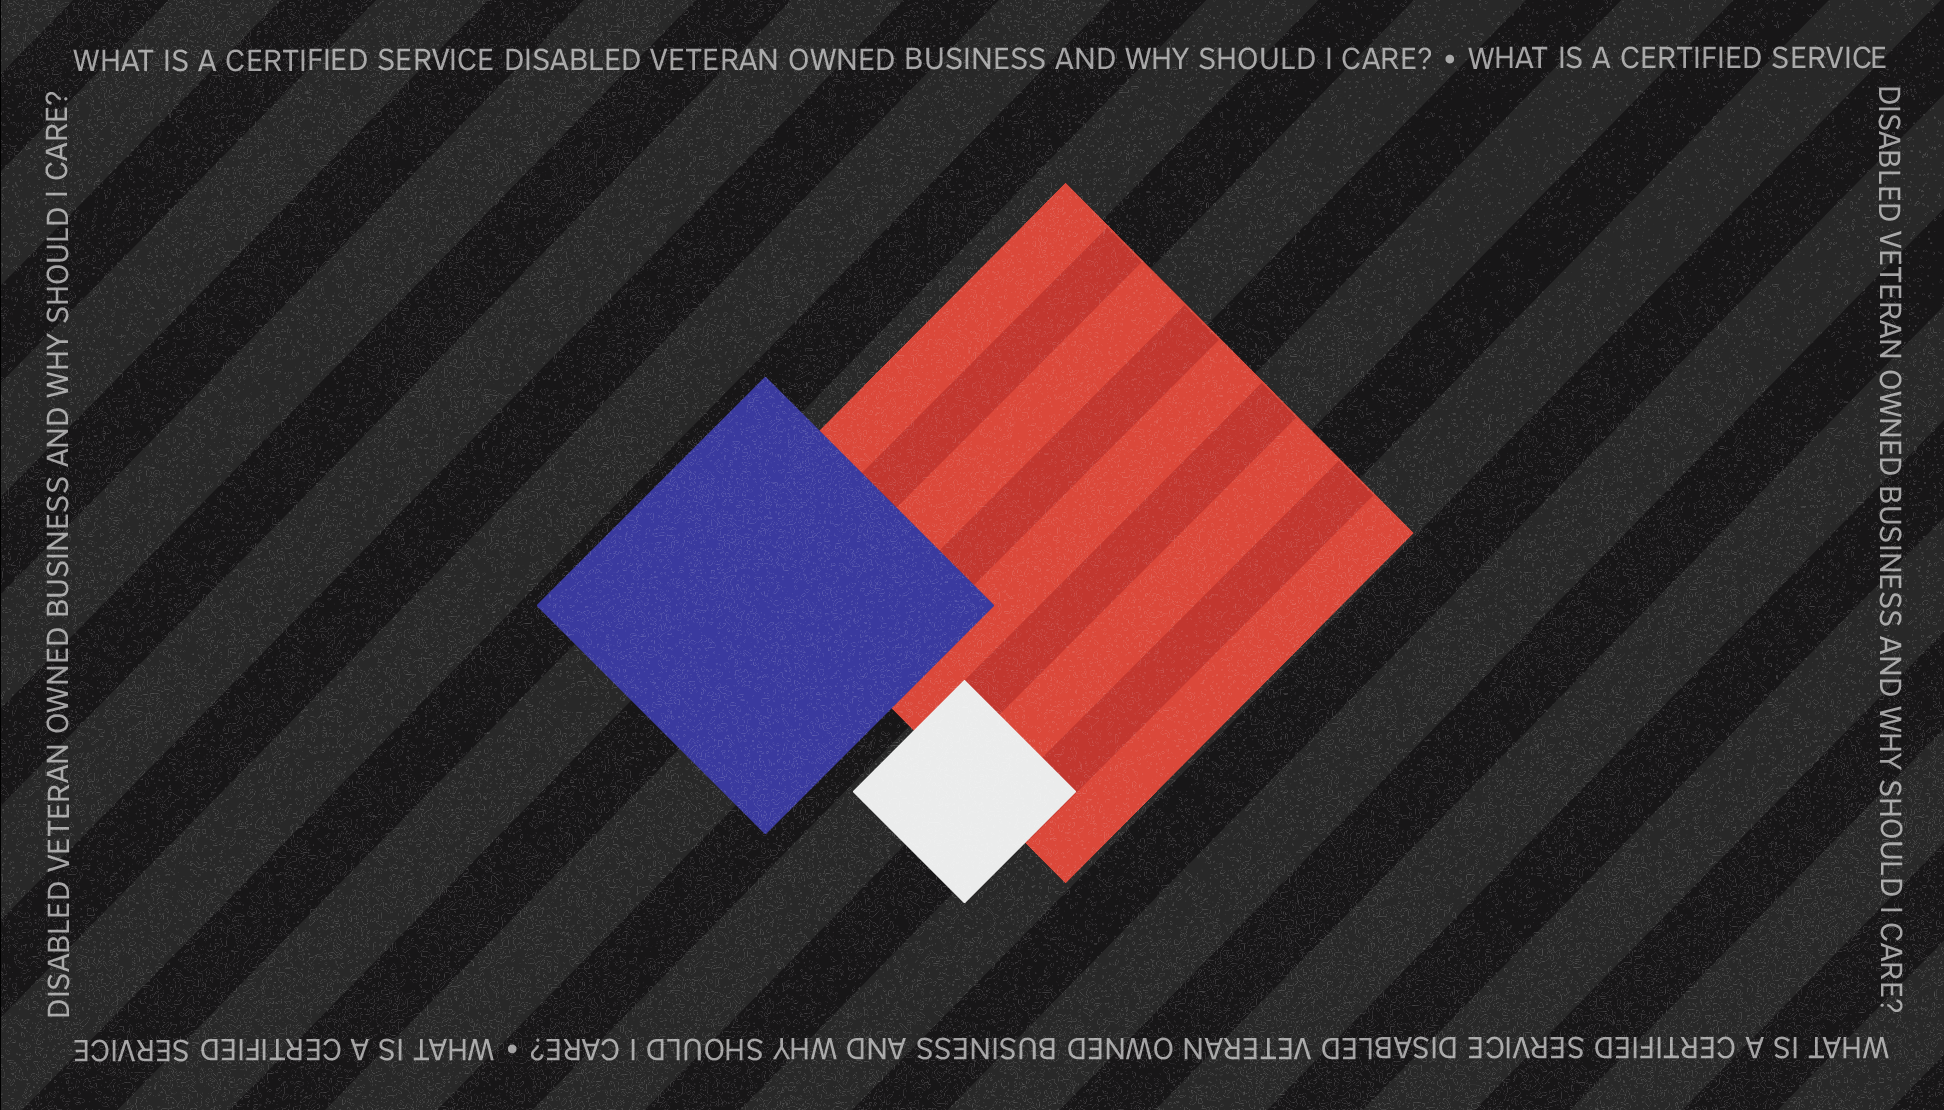 What is a Certified Service Disabled Veteran Owned Business (SDVOSB)?